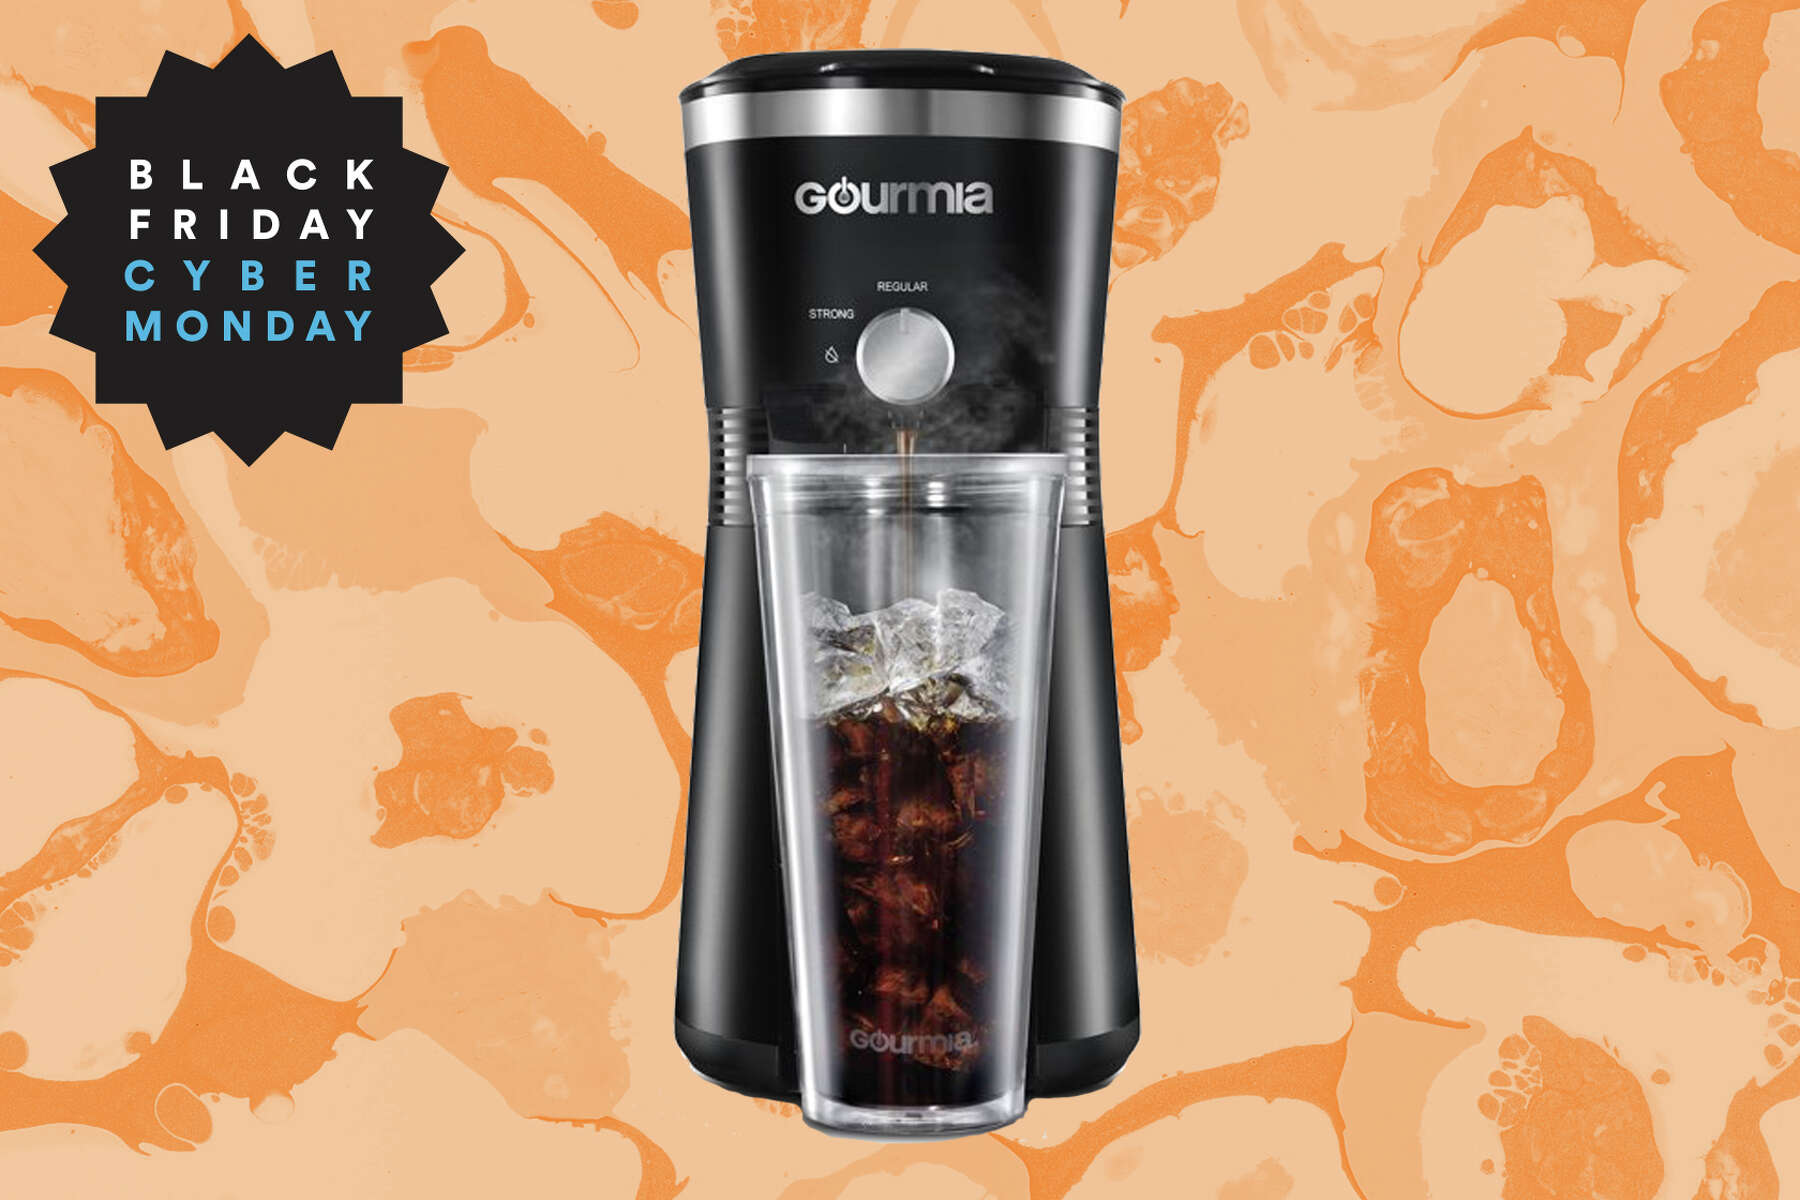 Save 15% on the iced coffee maker that brews in under four minutes